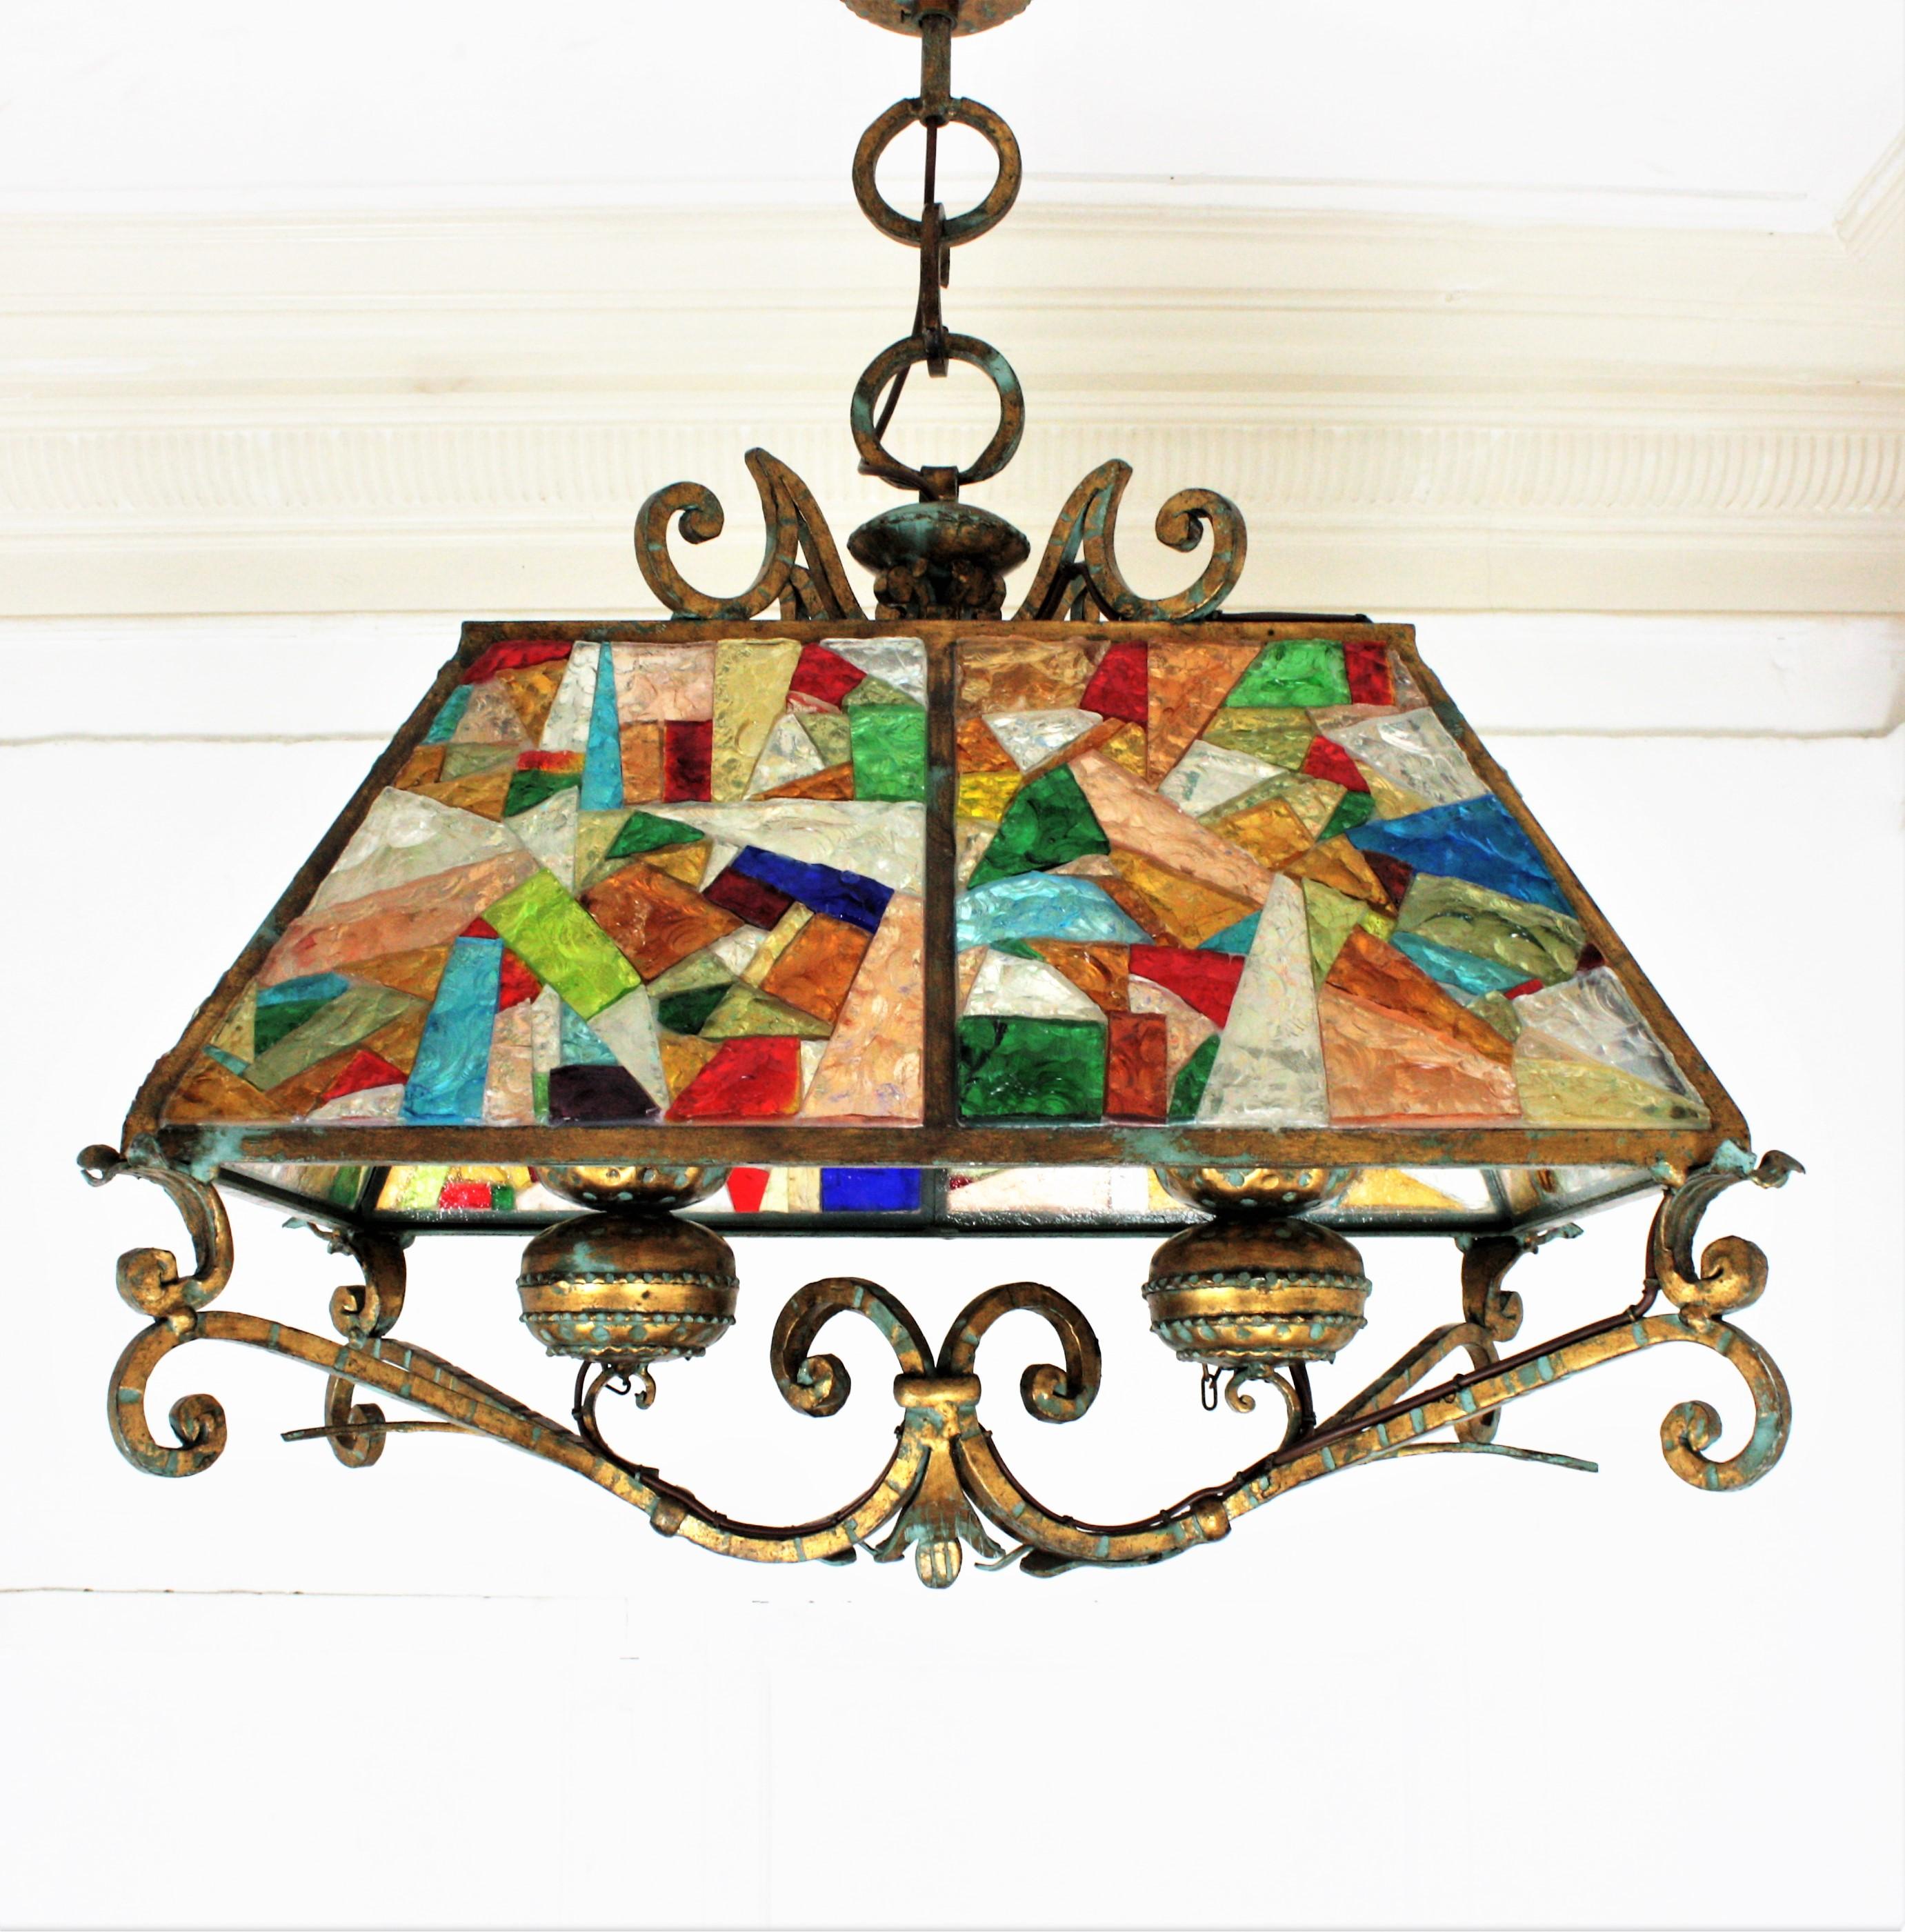 A massive multi-color hammered glass and gilt wrought iron suspension lamp. Manufactured by Longobard, the concurrent of Poliarte at the 1960s.
This ginormous lantern in Brutalist style has classical accents. The structure is made in heavy wrought